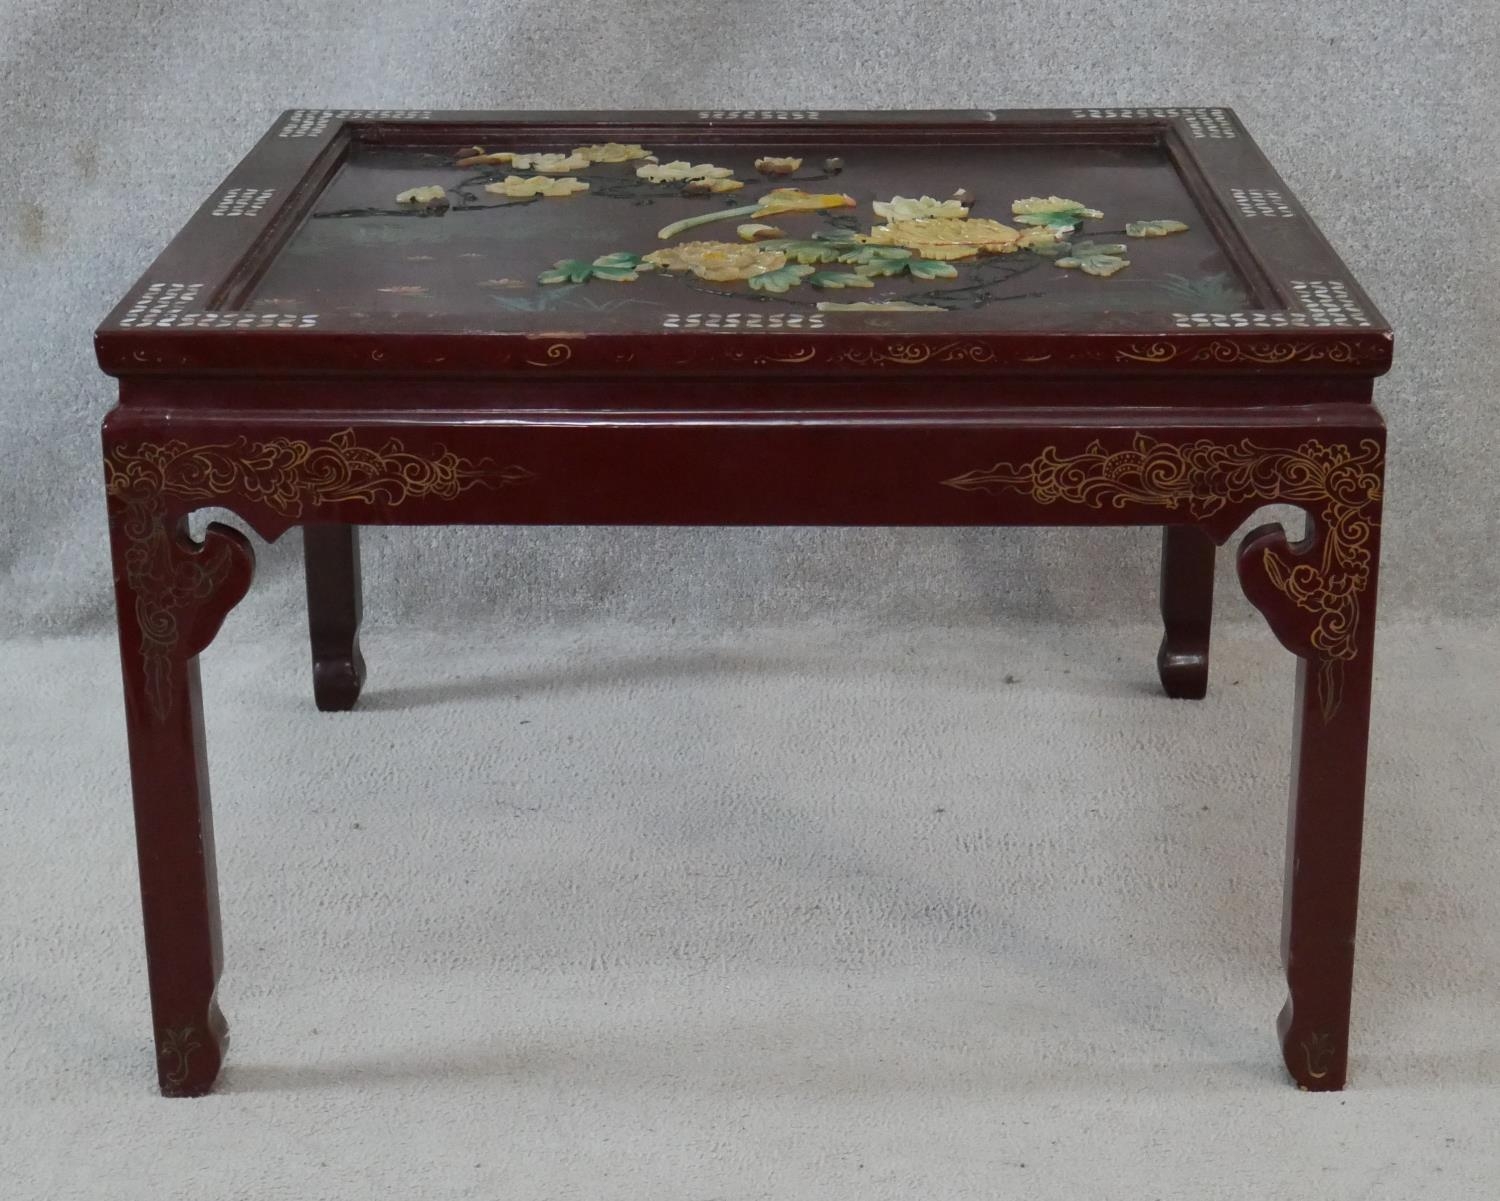 A Chinese black lacquered coffee table with bevelled plate glass drop in top, applied bird and - Image 2 of 8